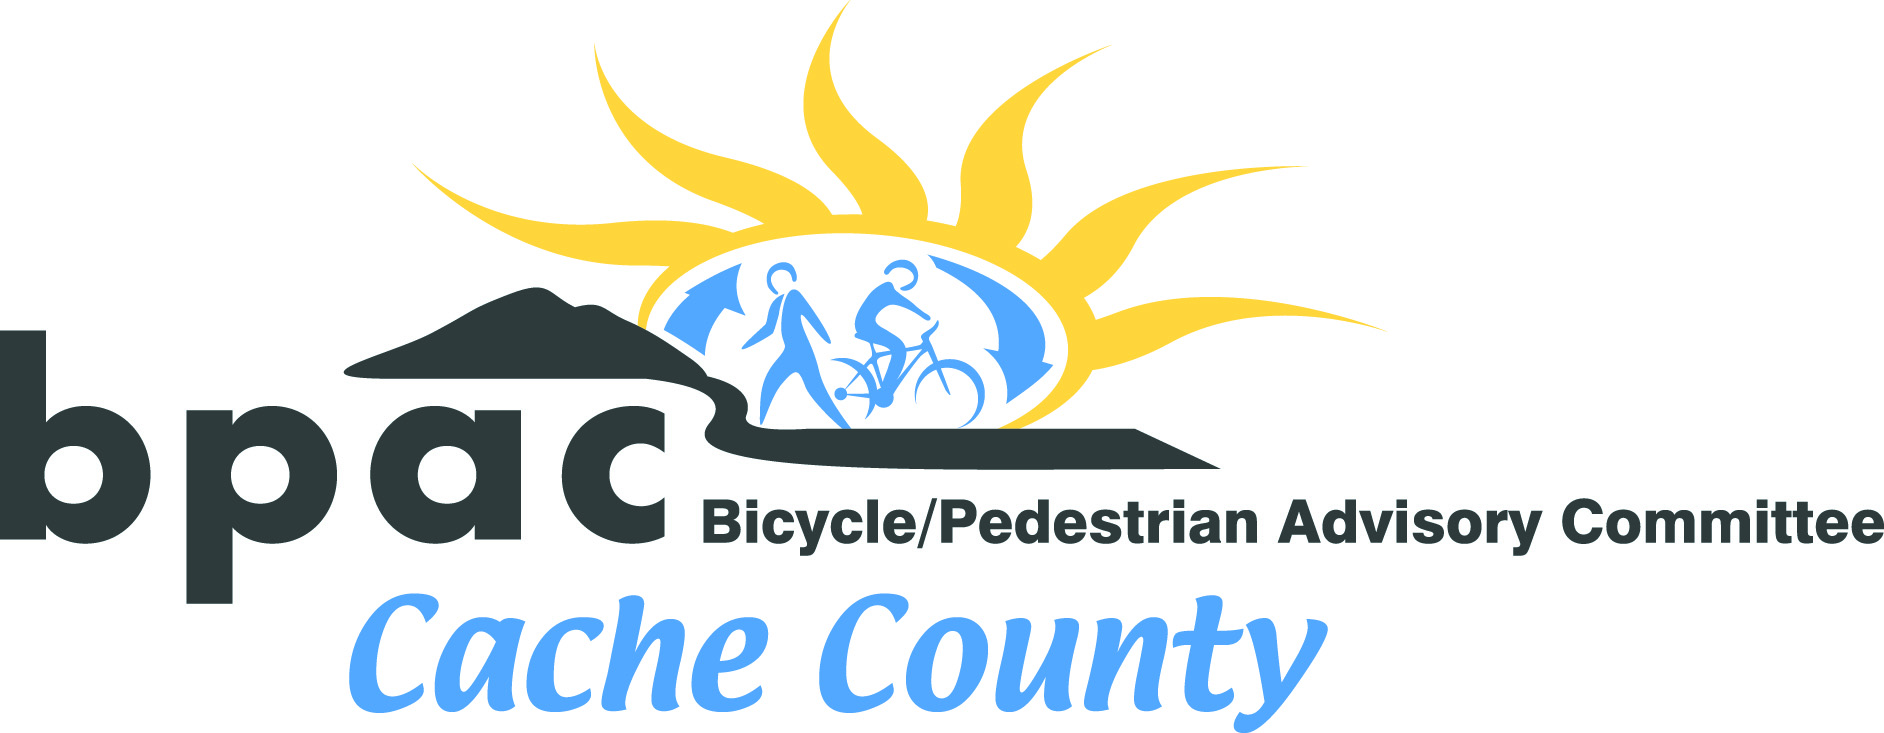 Bicycle Pedestrian Advisory Committee cache county logo